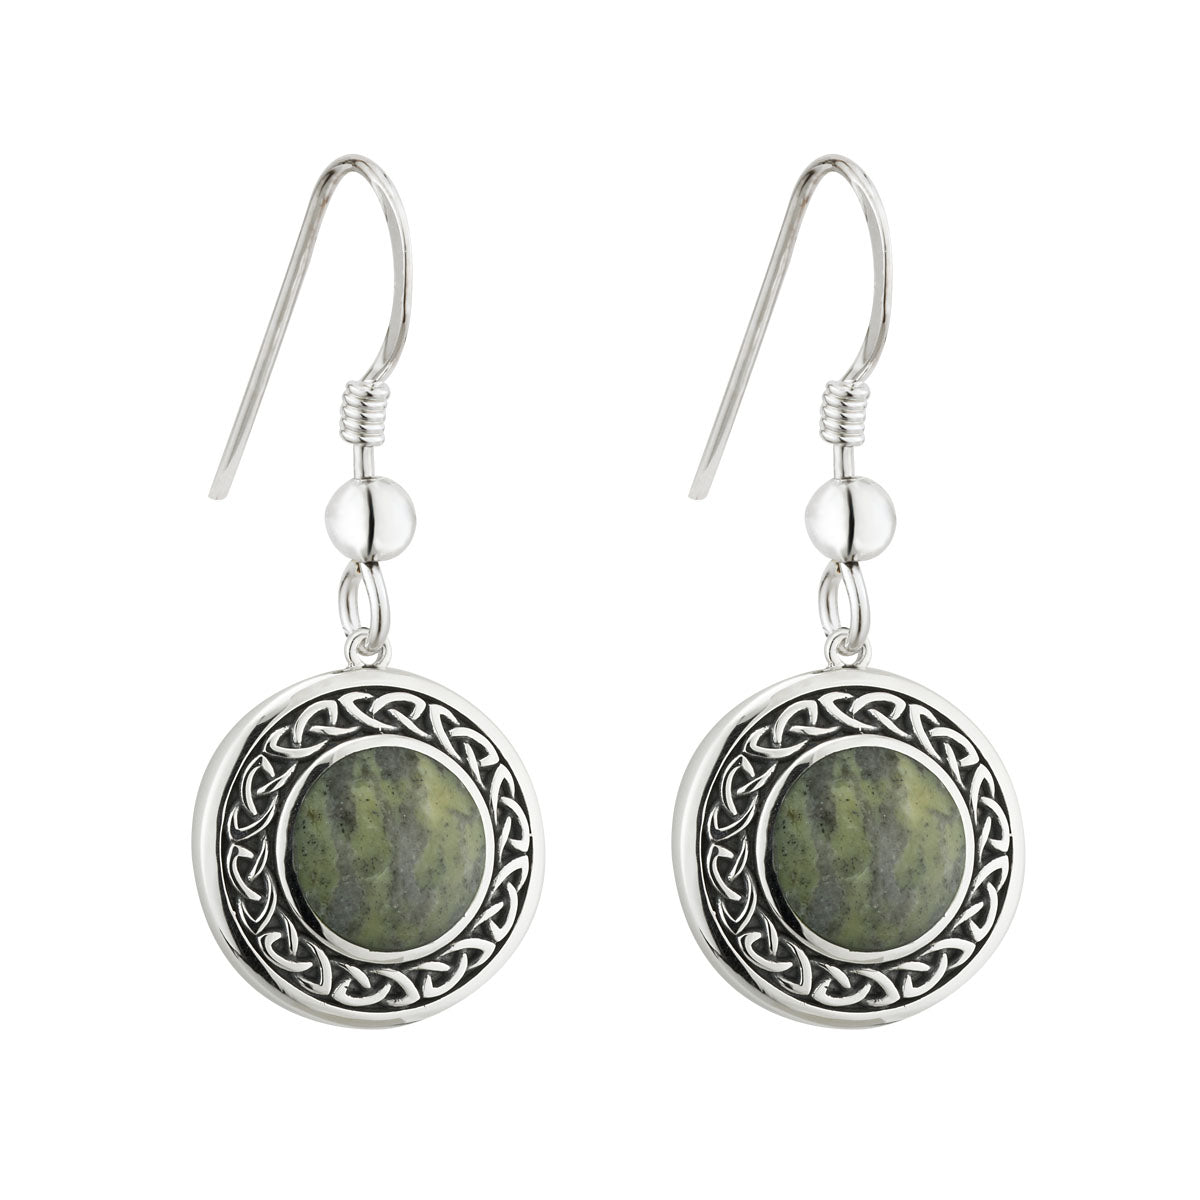 sterling silver connemara marble round celtic drop earrings s33772 from Solvar